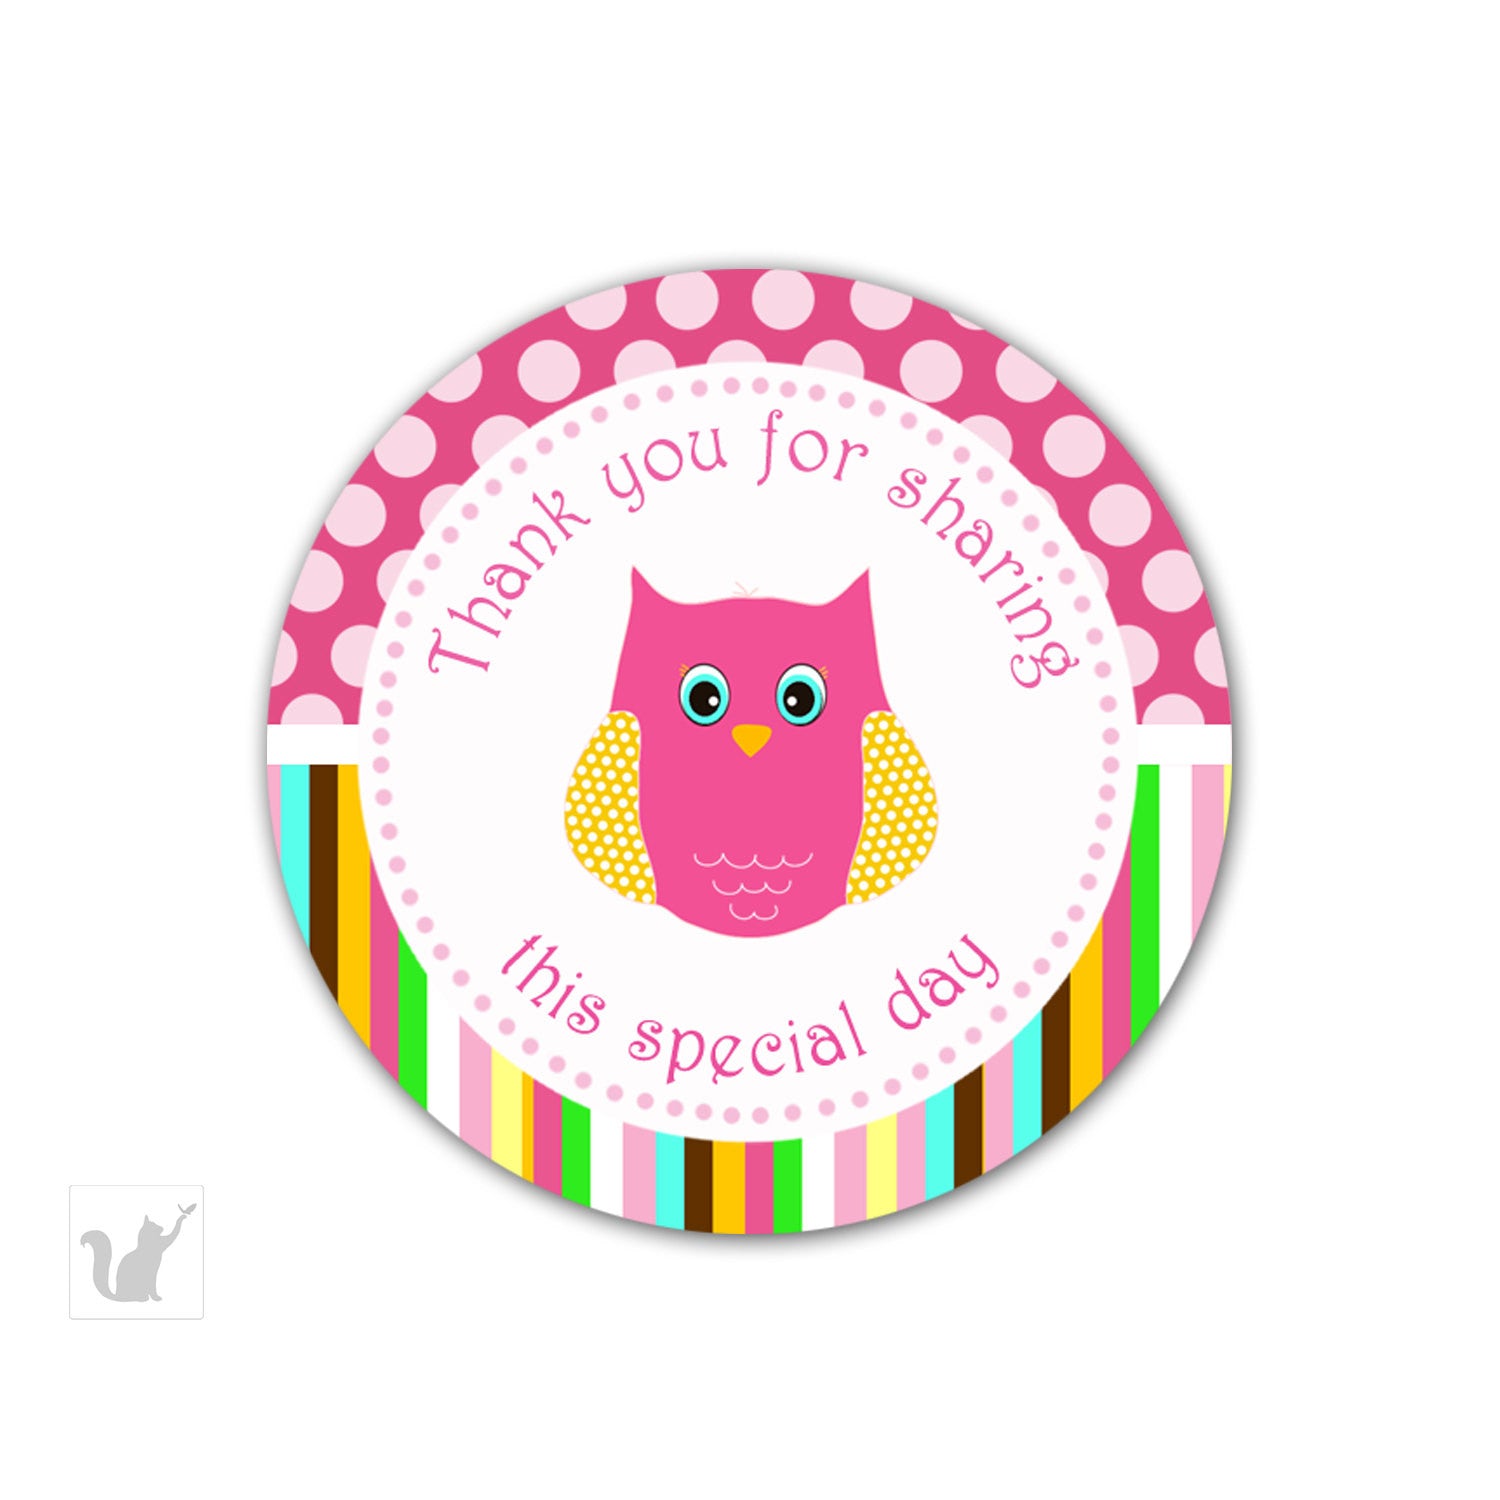 Owl Labels Owl Stickers Owl Gift Favor Tags - Birthday Party Baby Girl Shower Decoration Pink Brown Owl Cake Pop Labels INSTANT DOWNLOAD